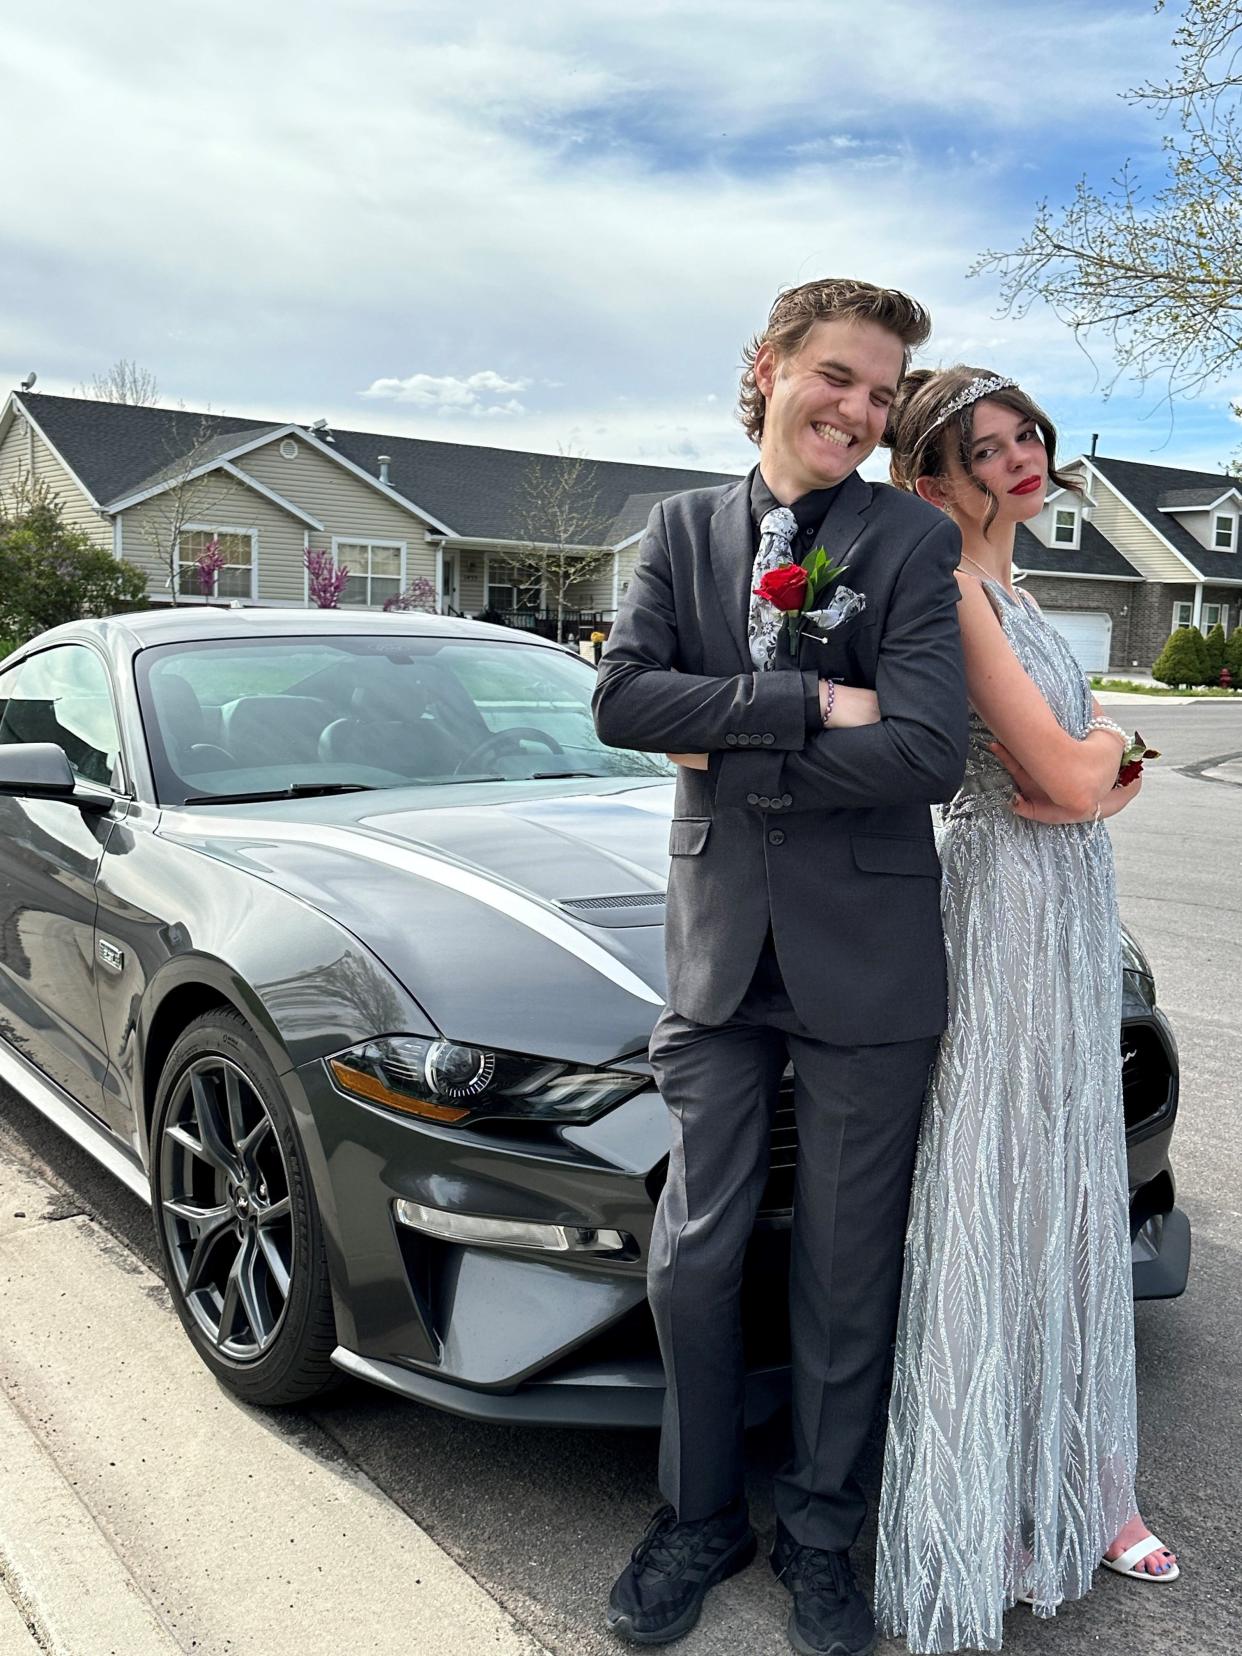 Joseph Tegerdine and Lily Flake, just before prom at Mapleton High School in Utah in April 2024, stand with his 2020 Ford Mustang. He is fighting cancer with just months to live. She reminds him he's still a teenager, he said.